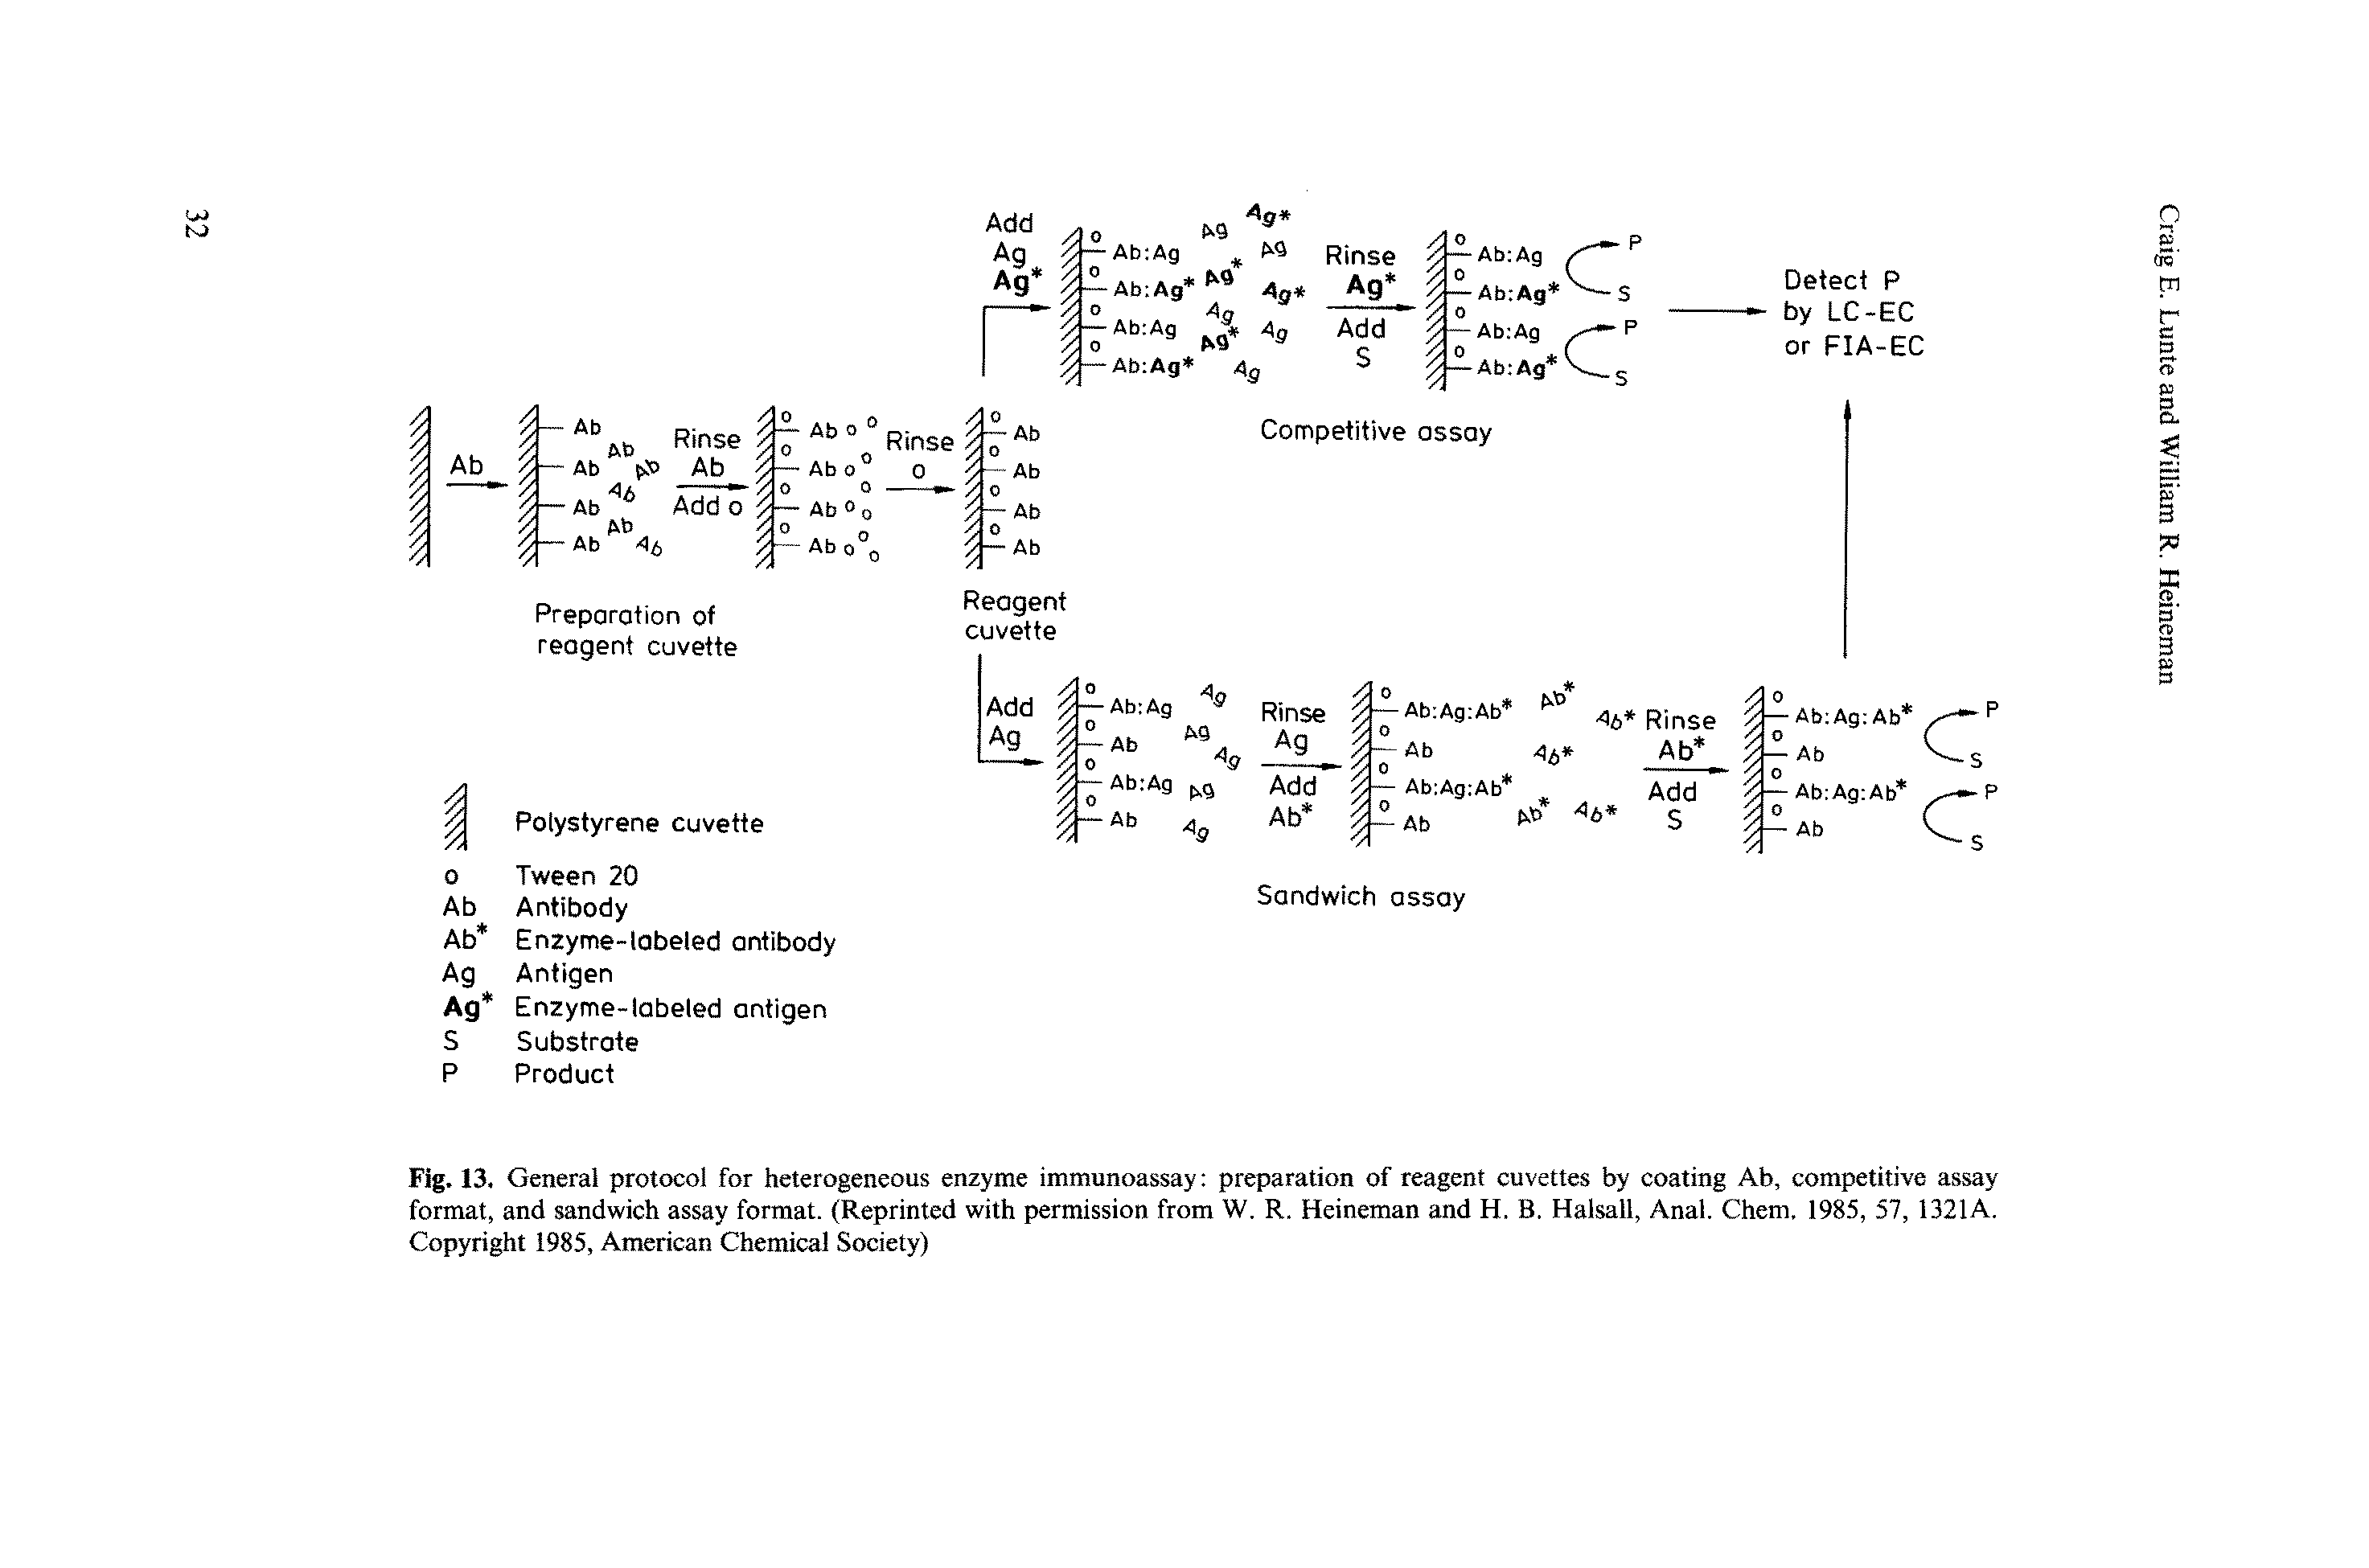 Fig. 13. General protocol for heterogeneous enzyme immunoassay preparation of reagent cuvettes by coating Ab, competitive assay format, and sandwich assay format. (Reprinted with permission from W. R. Heineman and H. B. Halsall, Anal. Chem, 1985, 57, 1321A. Copyright 1985, American Chemical Society)...